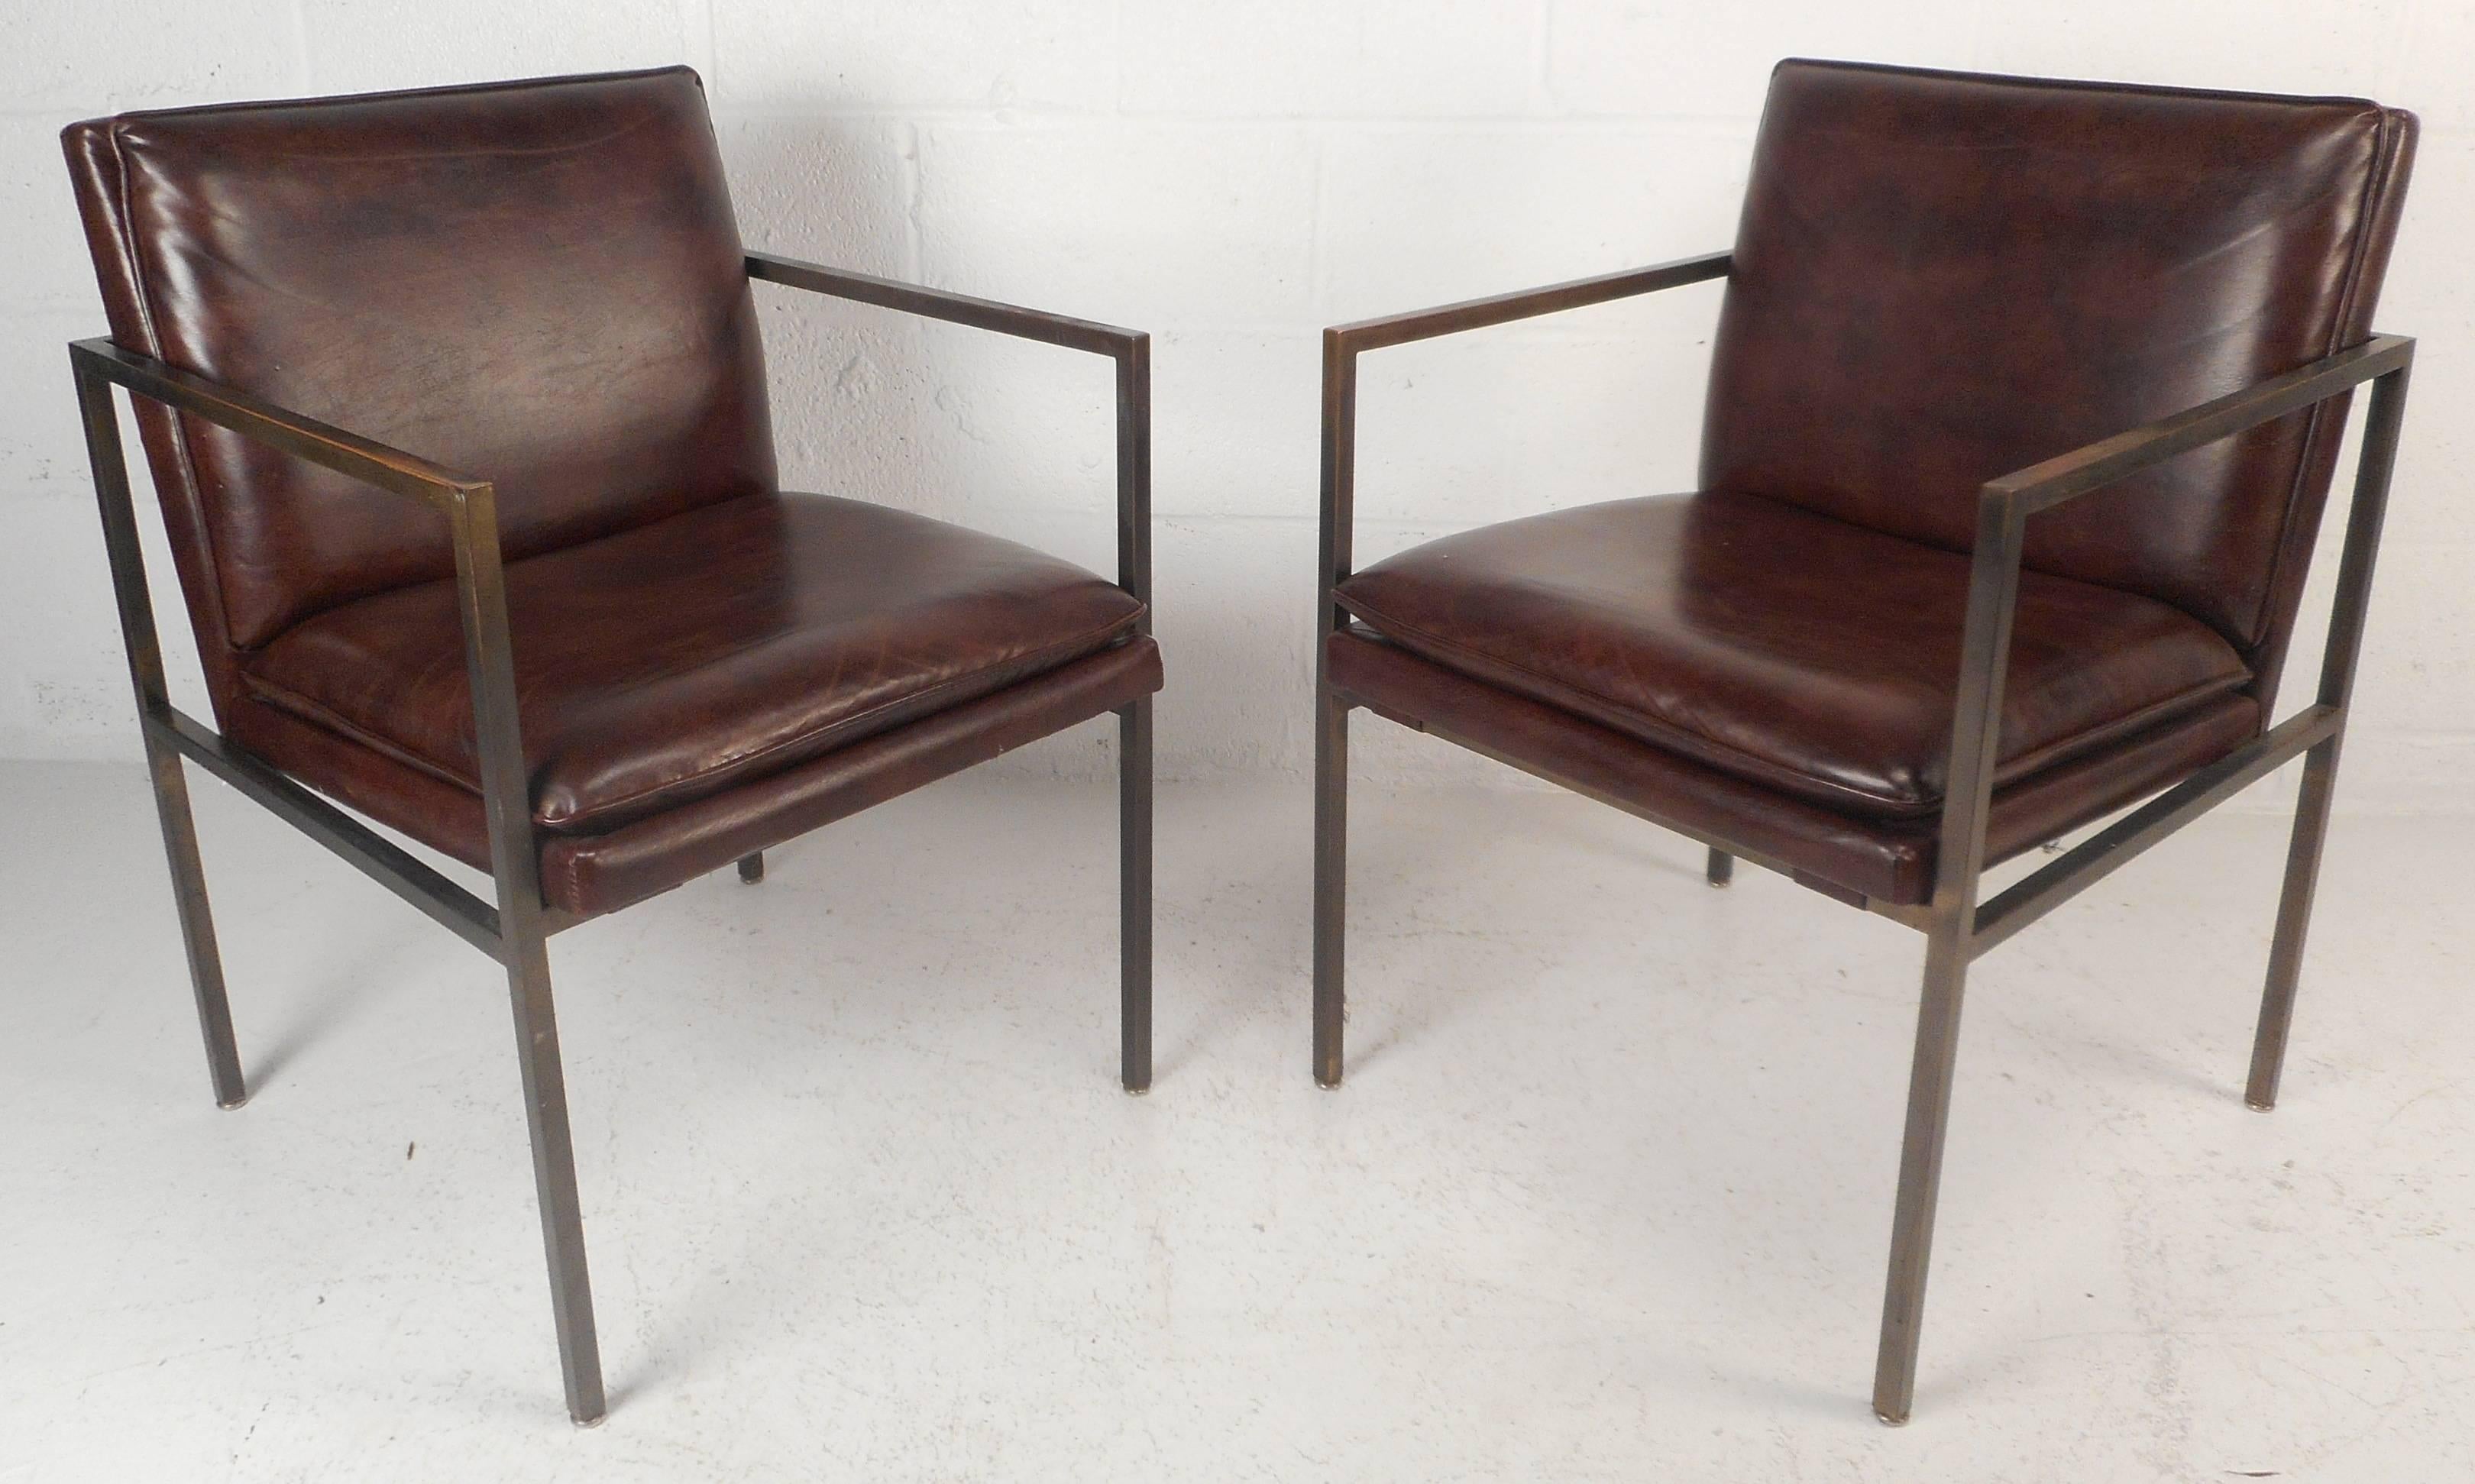 Elegant vintage modern pair of armchairs feature a solid brass frame with stylish brown vinyl upholstery. The unique design has thick padded seating with strategically placed armrests ensuring comfort. This Mid-Century pair shows quality